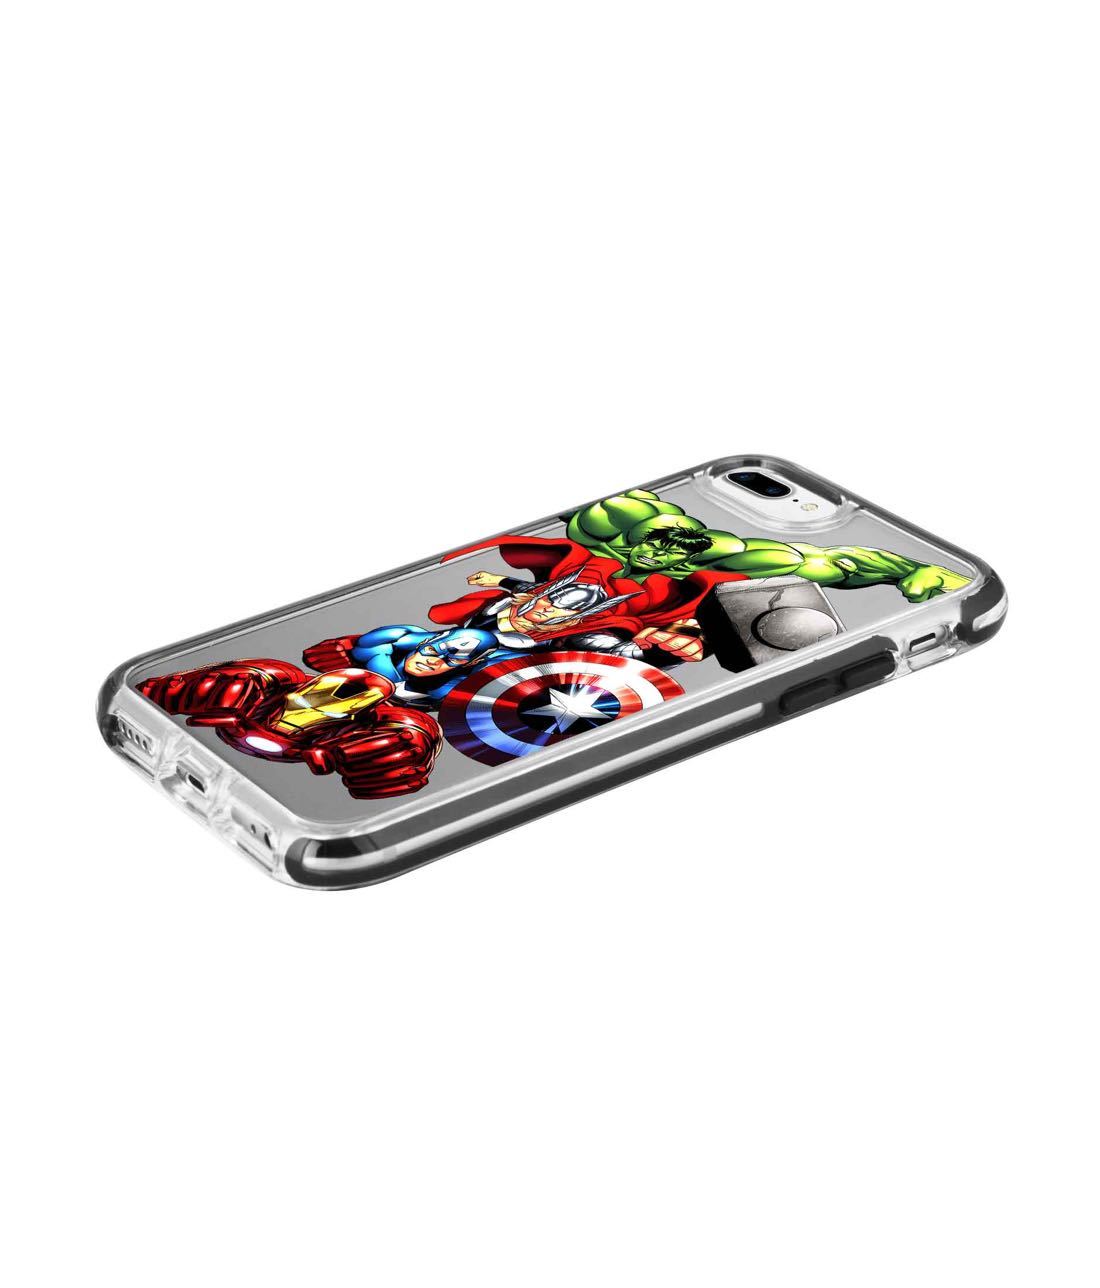 Avengers Fury - Extreme Phone Case for iPhone 7 Plus